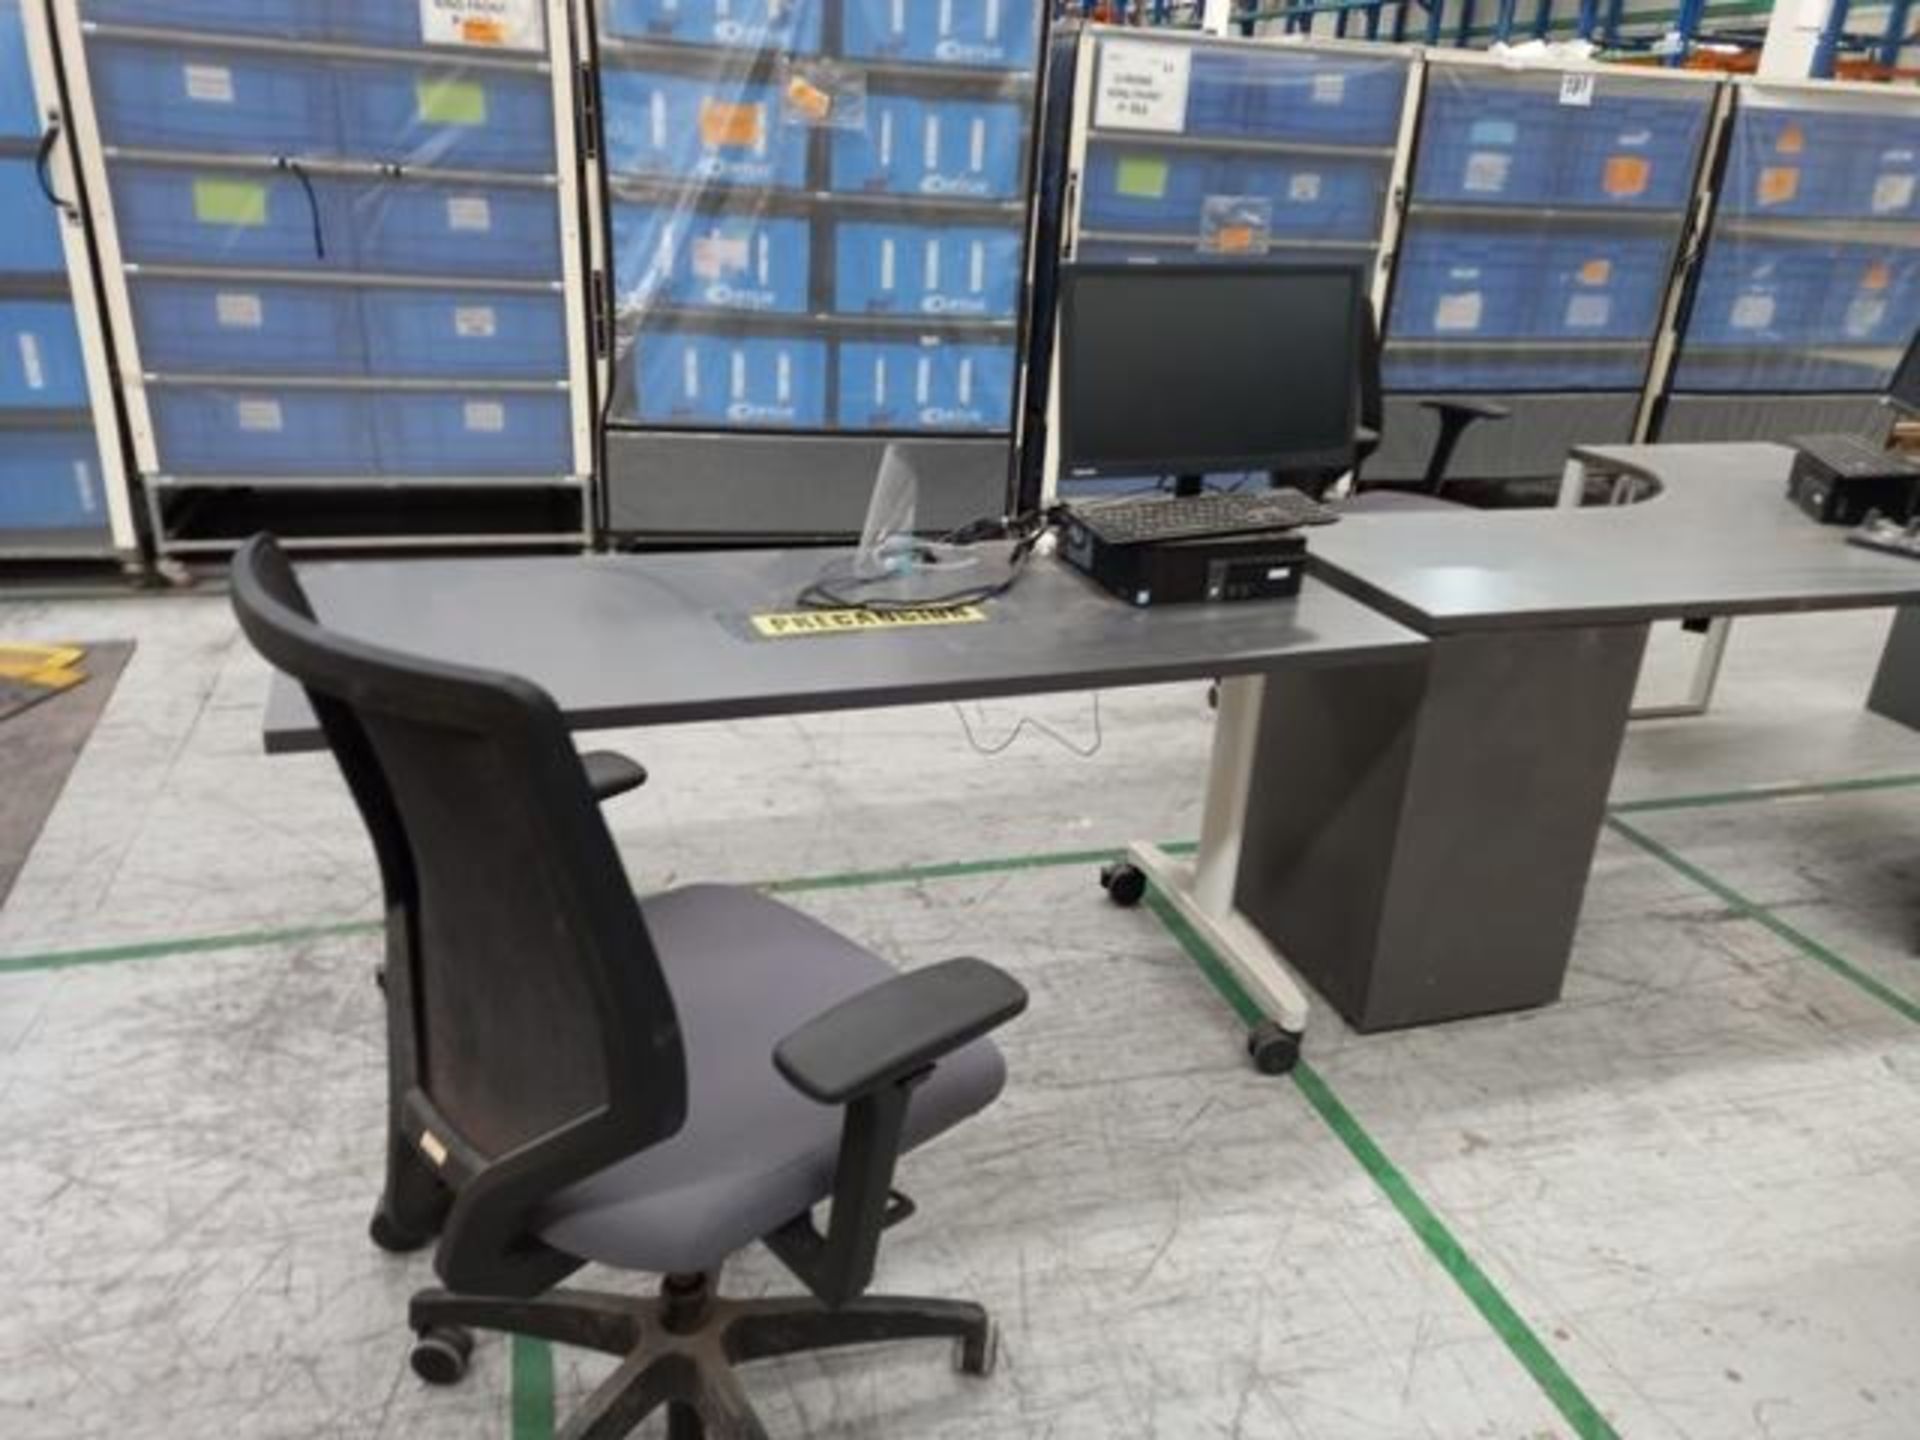 LOT: (66) Of Furniture and Computing Equipment Consisting of: Computers, Printers, Desks, Chairs, Dr - Image 30 of 38